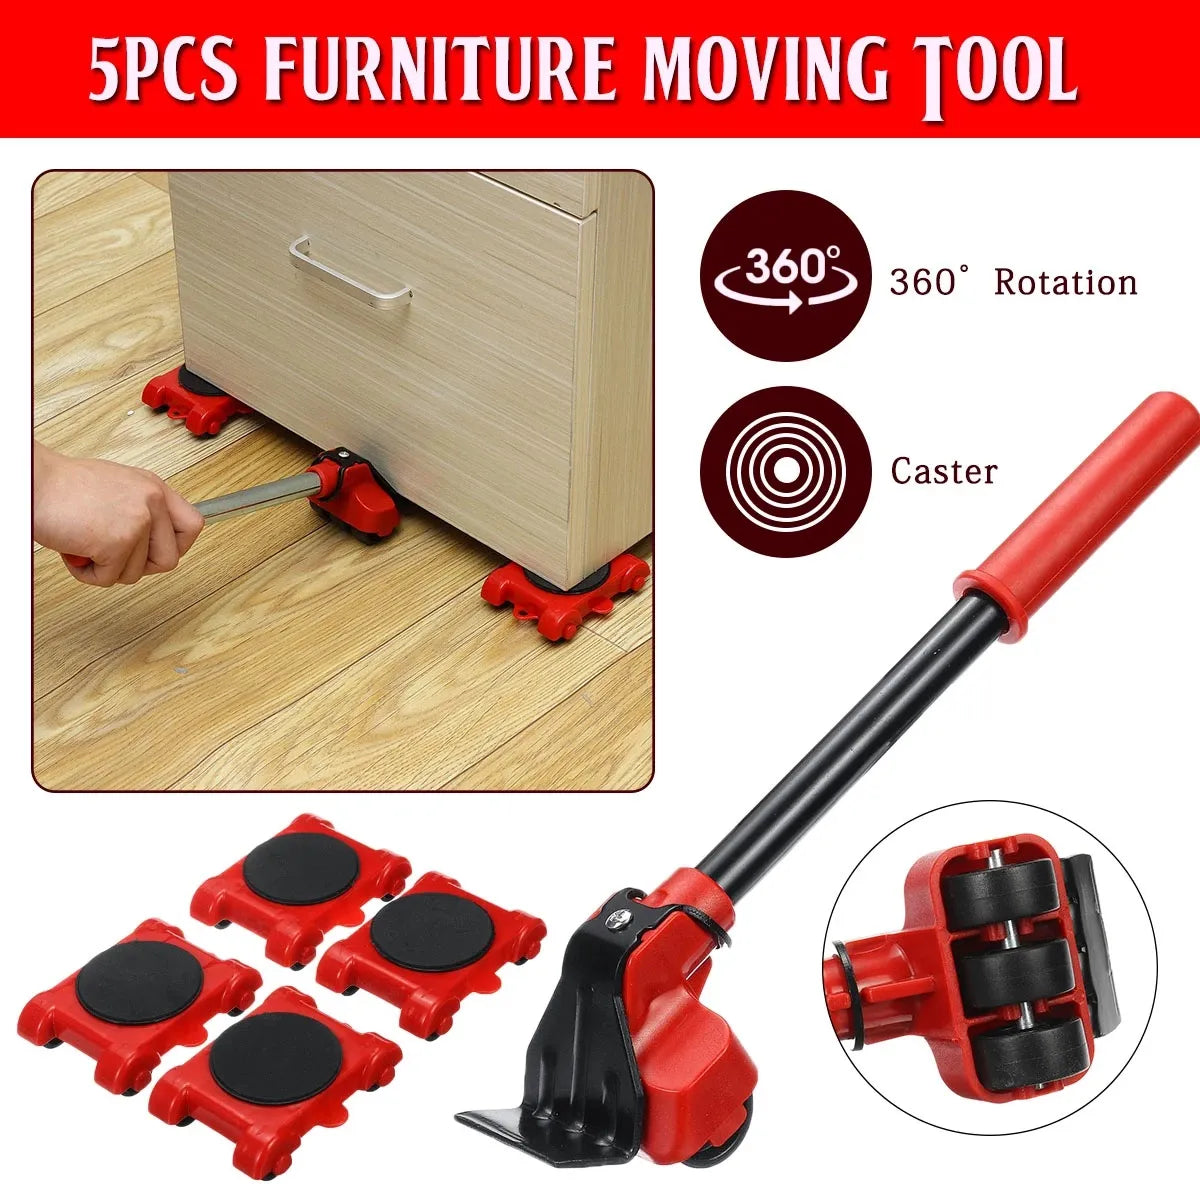 Furniture Mover & Lifting Tool